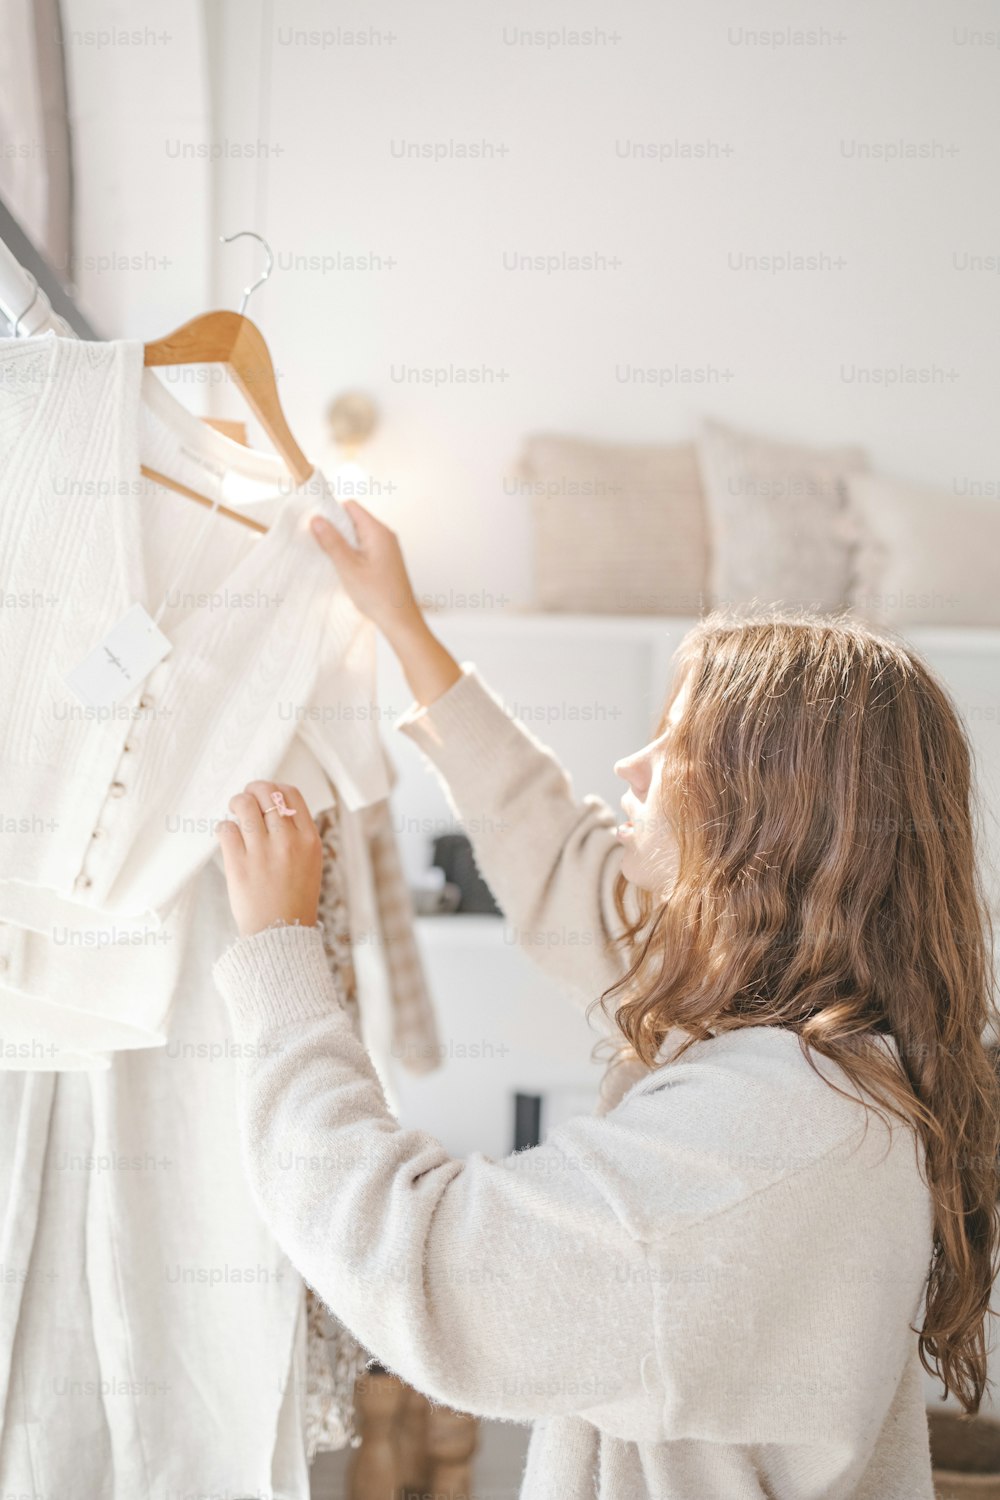 a woman looking at a dress on a hanger